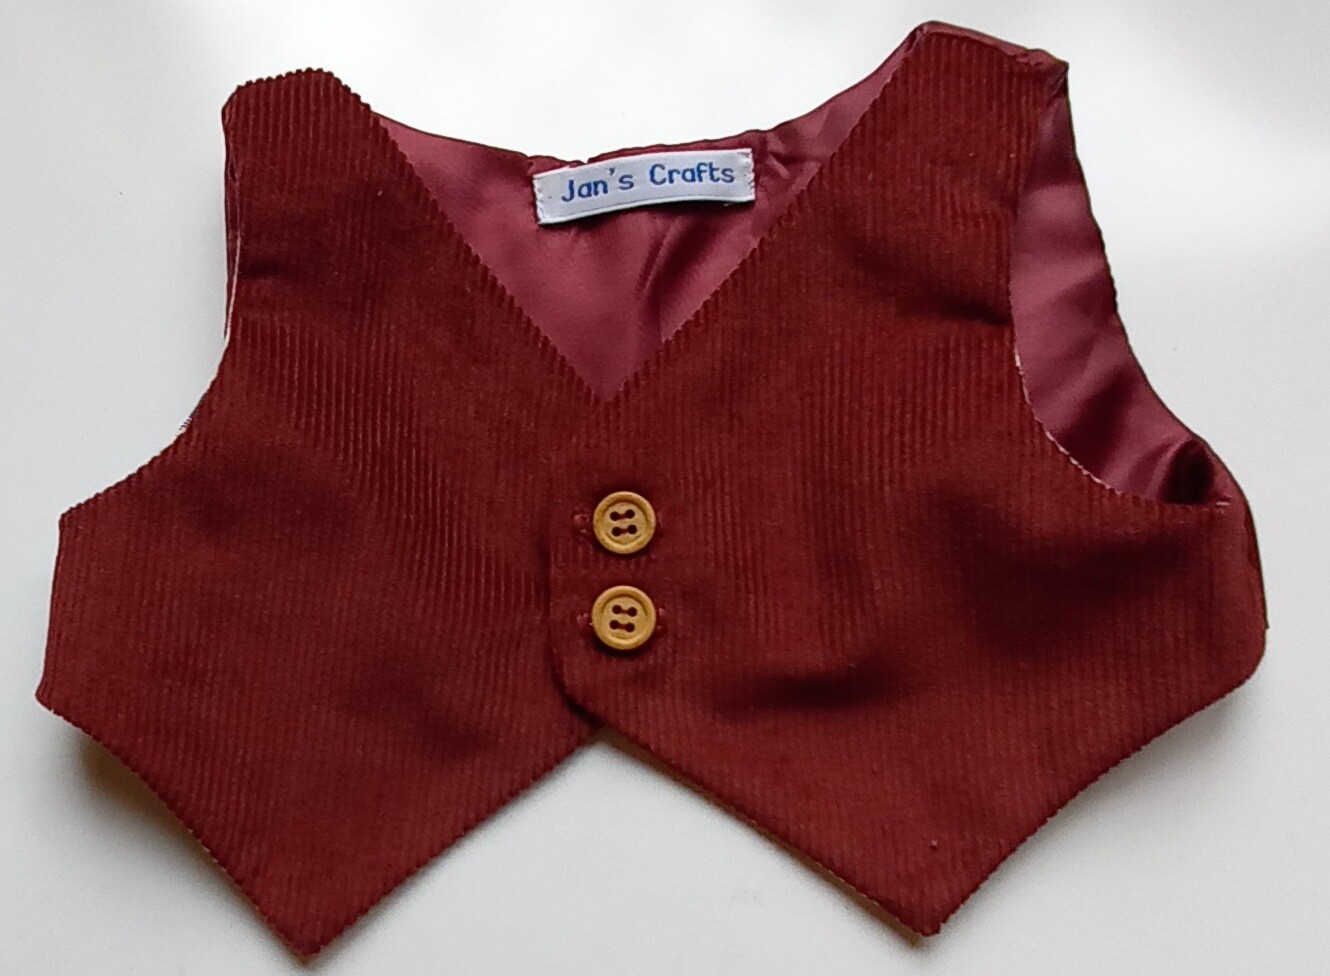 Waistcoat for bears - Wine colour corduroy front with check front lining.